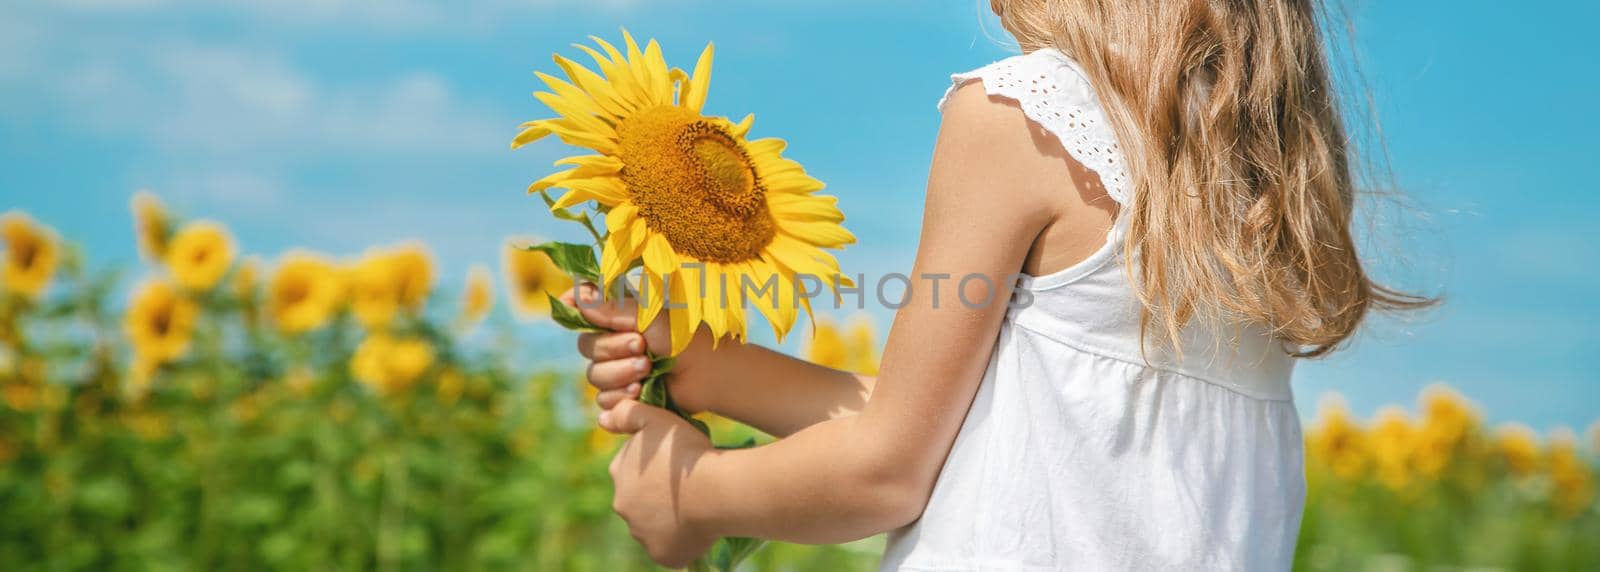 A child in a field of sunflowers. Selective focus.